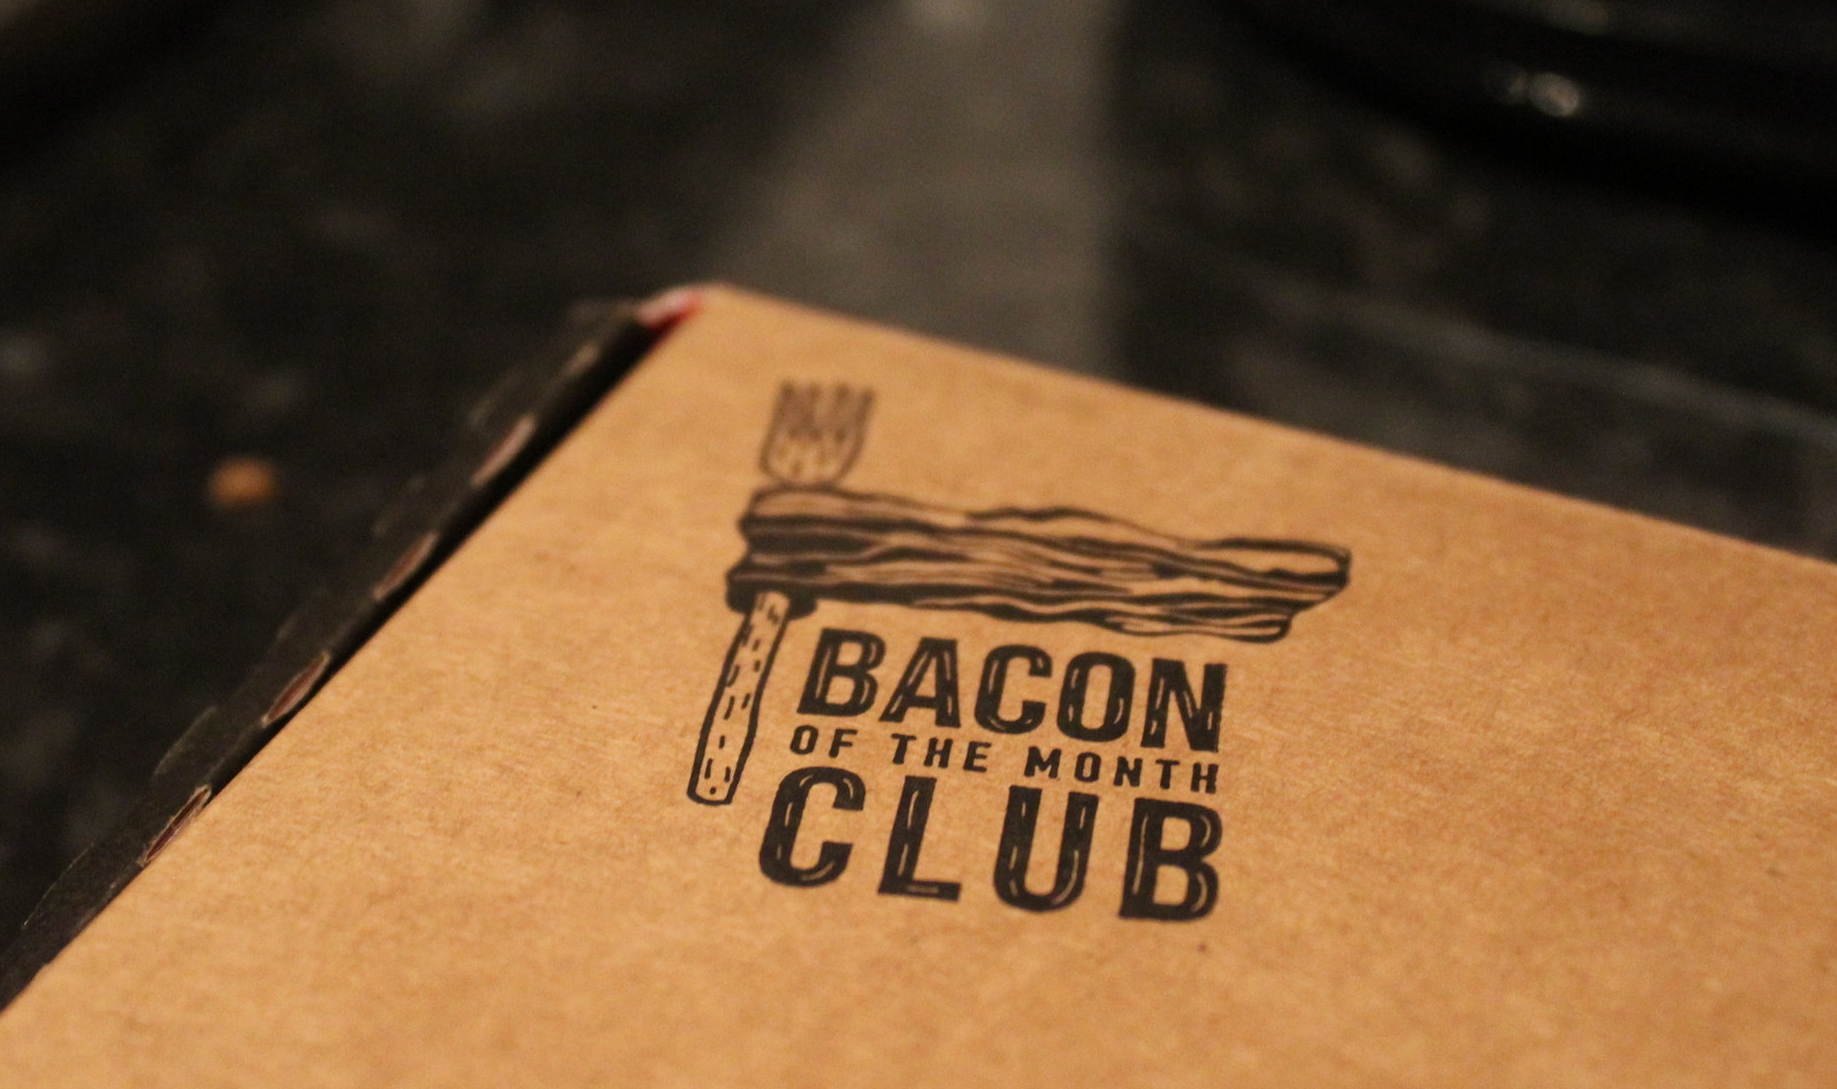 Bacon of the month club